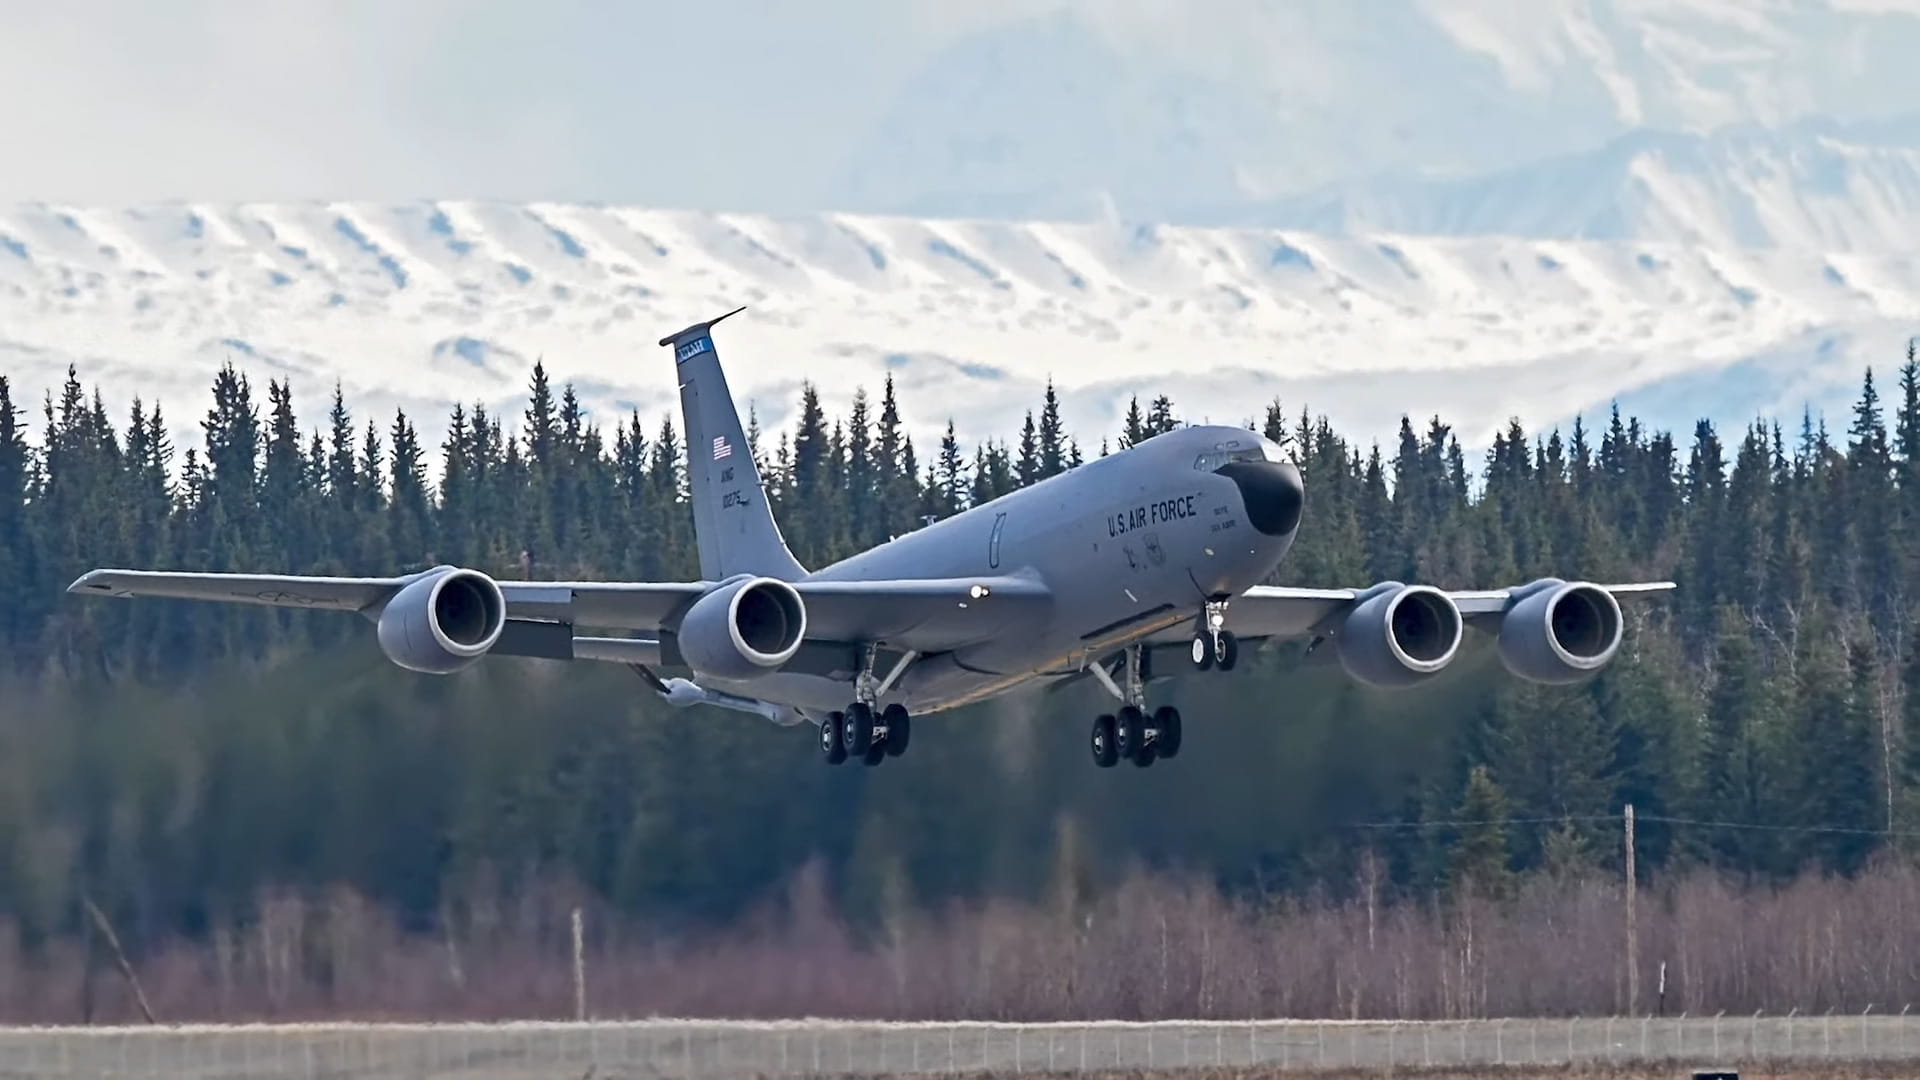 A military tanker transport aircraft at landing